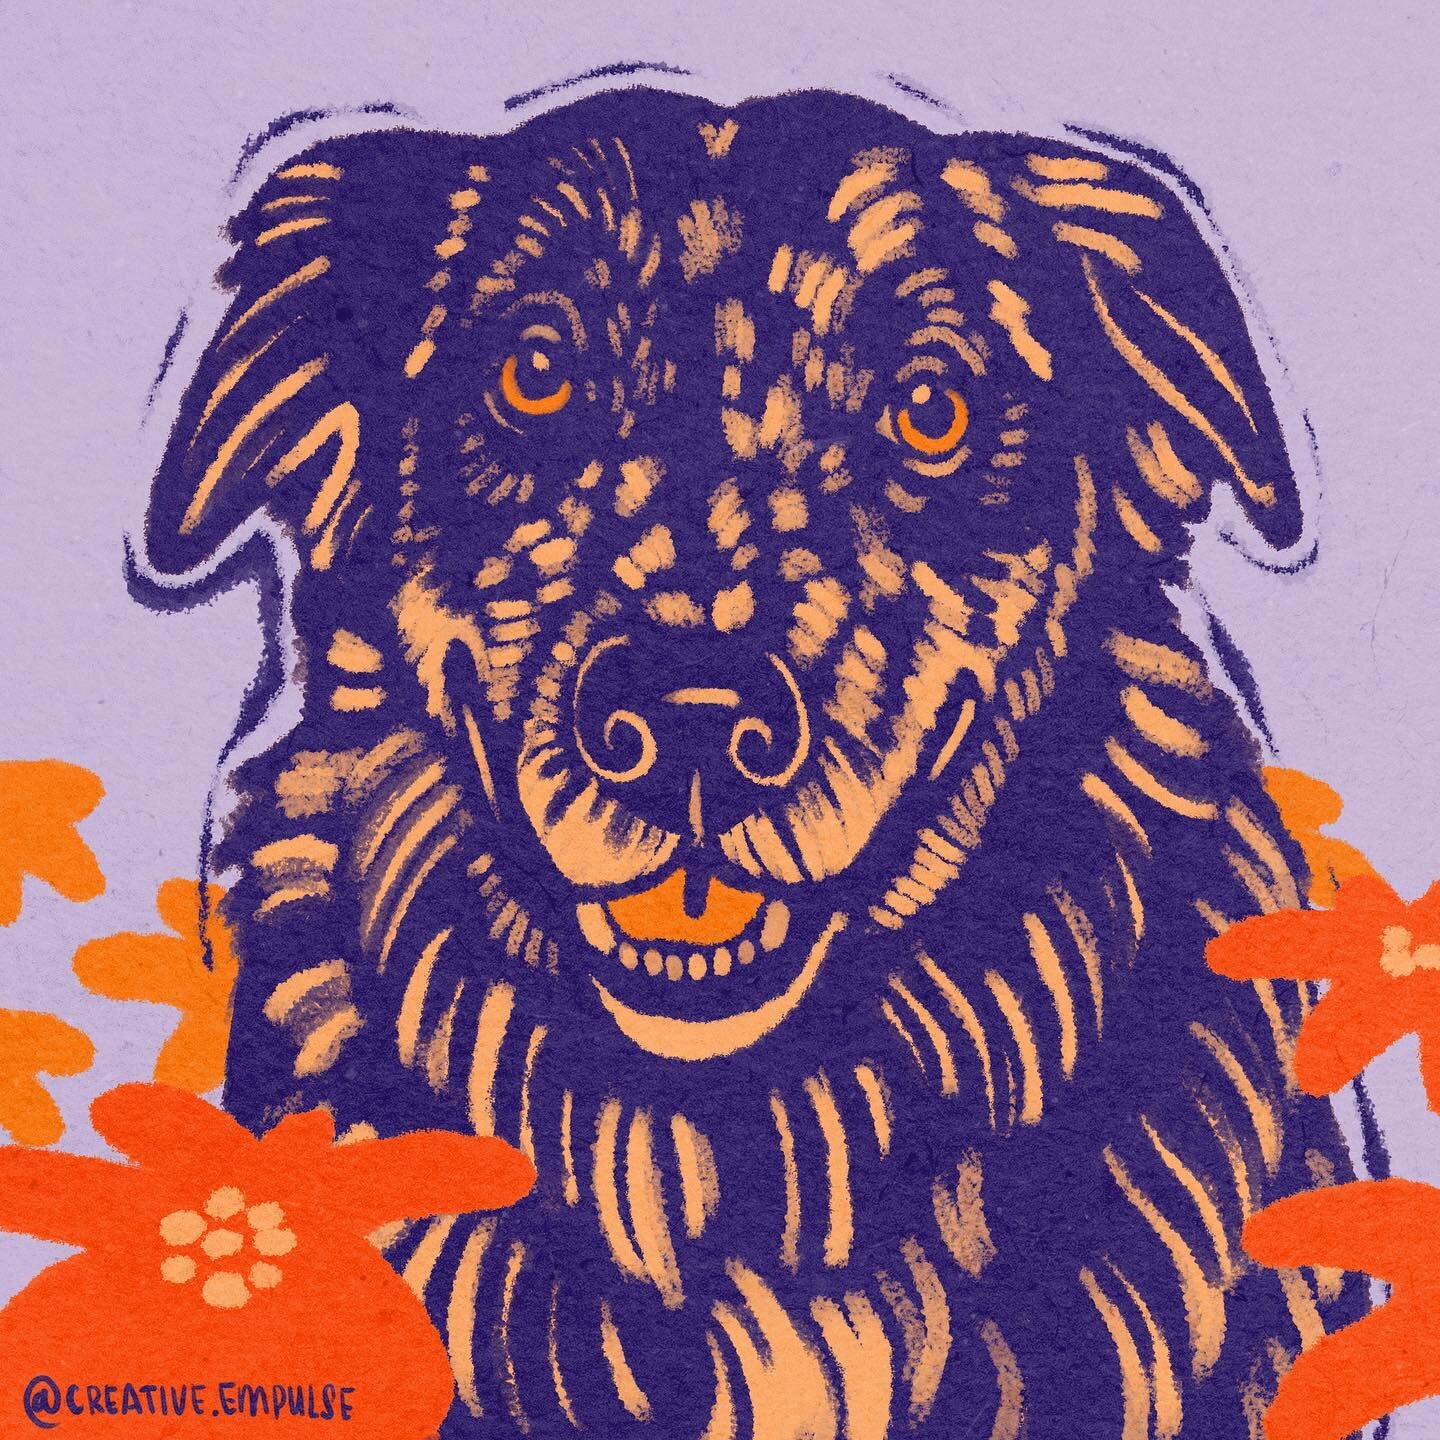 Current color obsession: lavender and orange💜🧡 What color combos are you loving these days? Bonus points if you&rsquo;re feeling fun and tell me in emojis!
.
.
#petportraitartist #petportraitsfromphotos #petportraiture #petportraitart #crazydogmom 